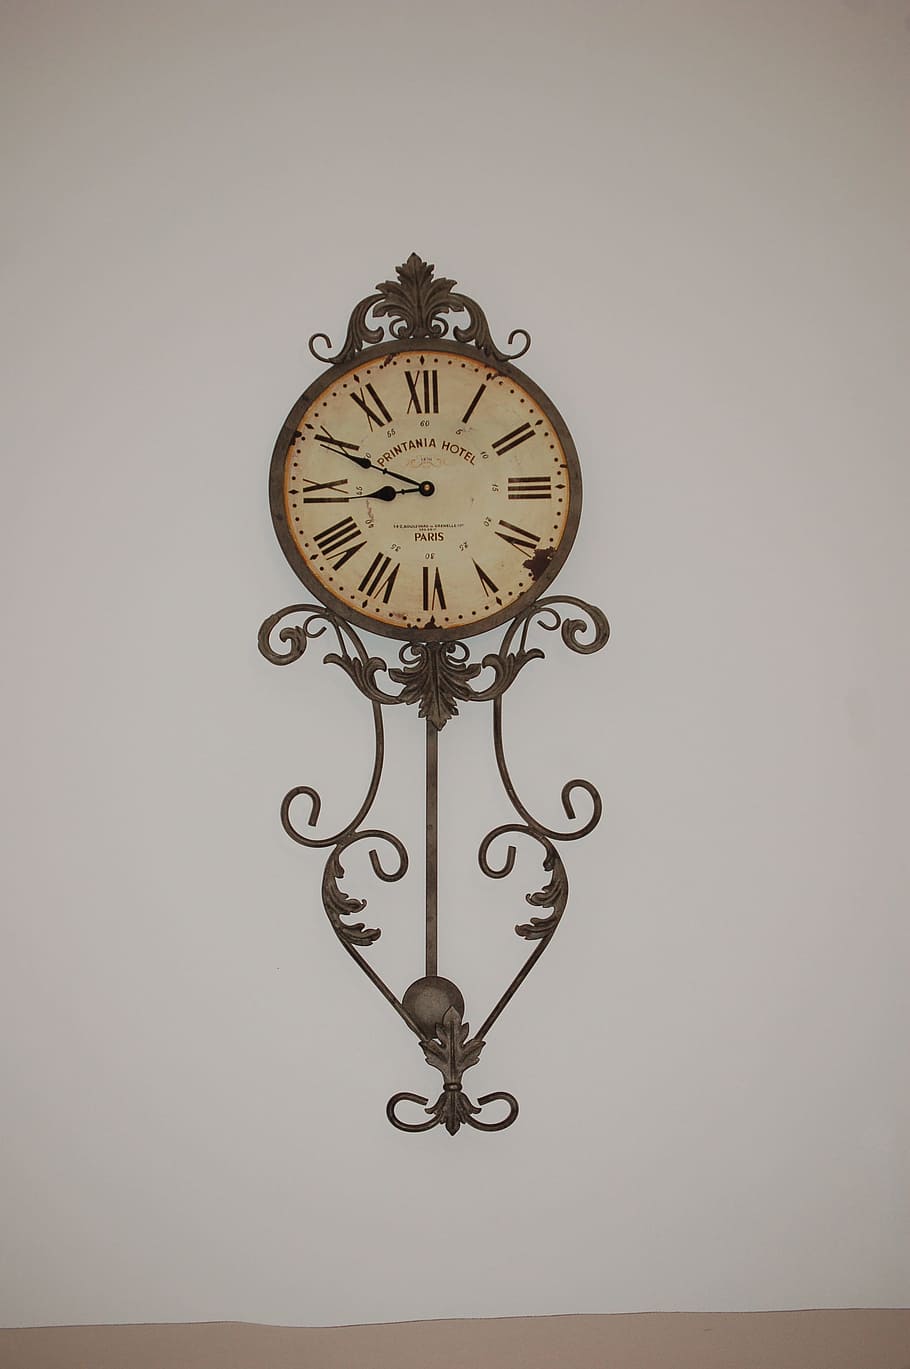 Wall Clock, Time, clock, wall clock, time, wall, old-fashioned, old, antique, clock Face, retro Styled